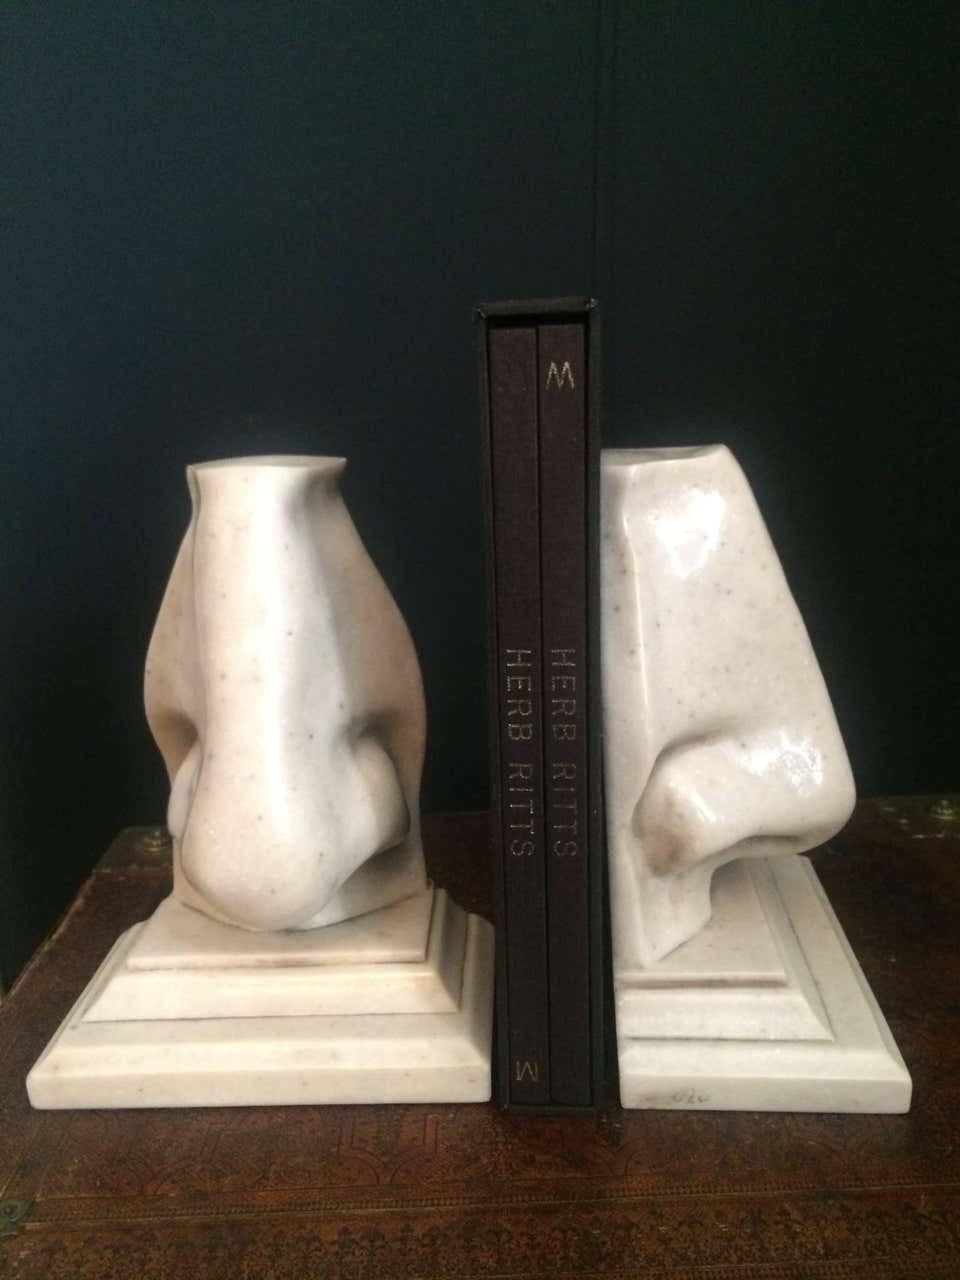 Oversized nose bookends by c2c Designs - made of composition resin with the look of 